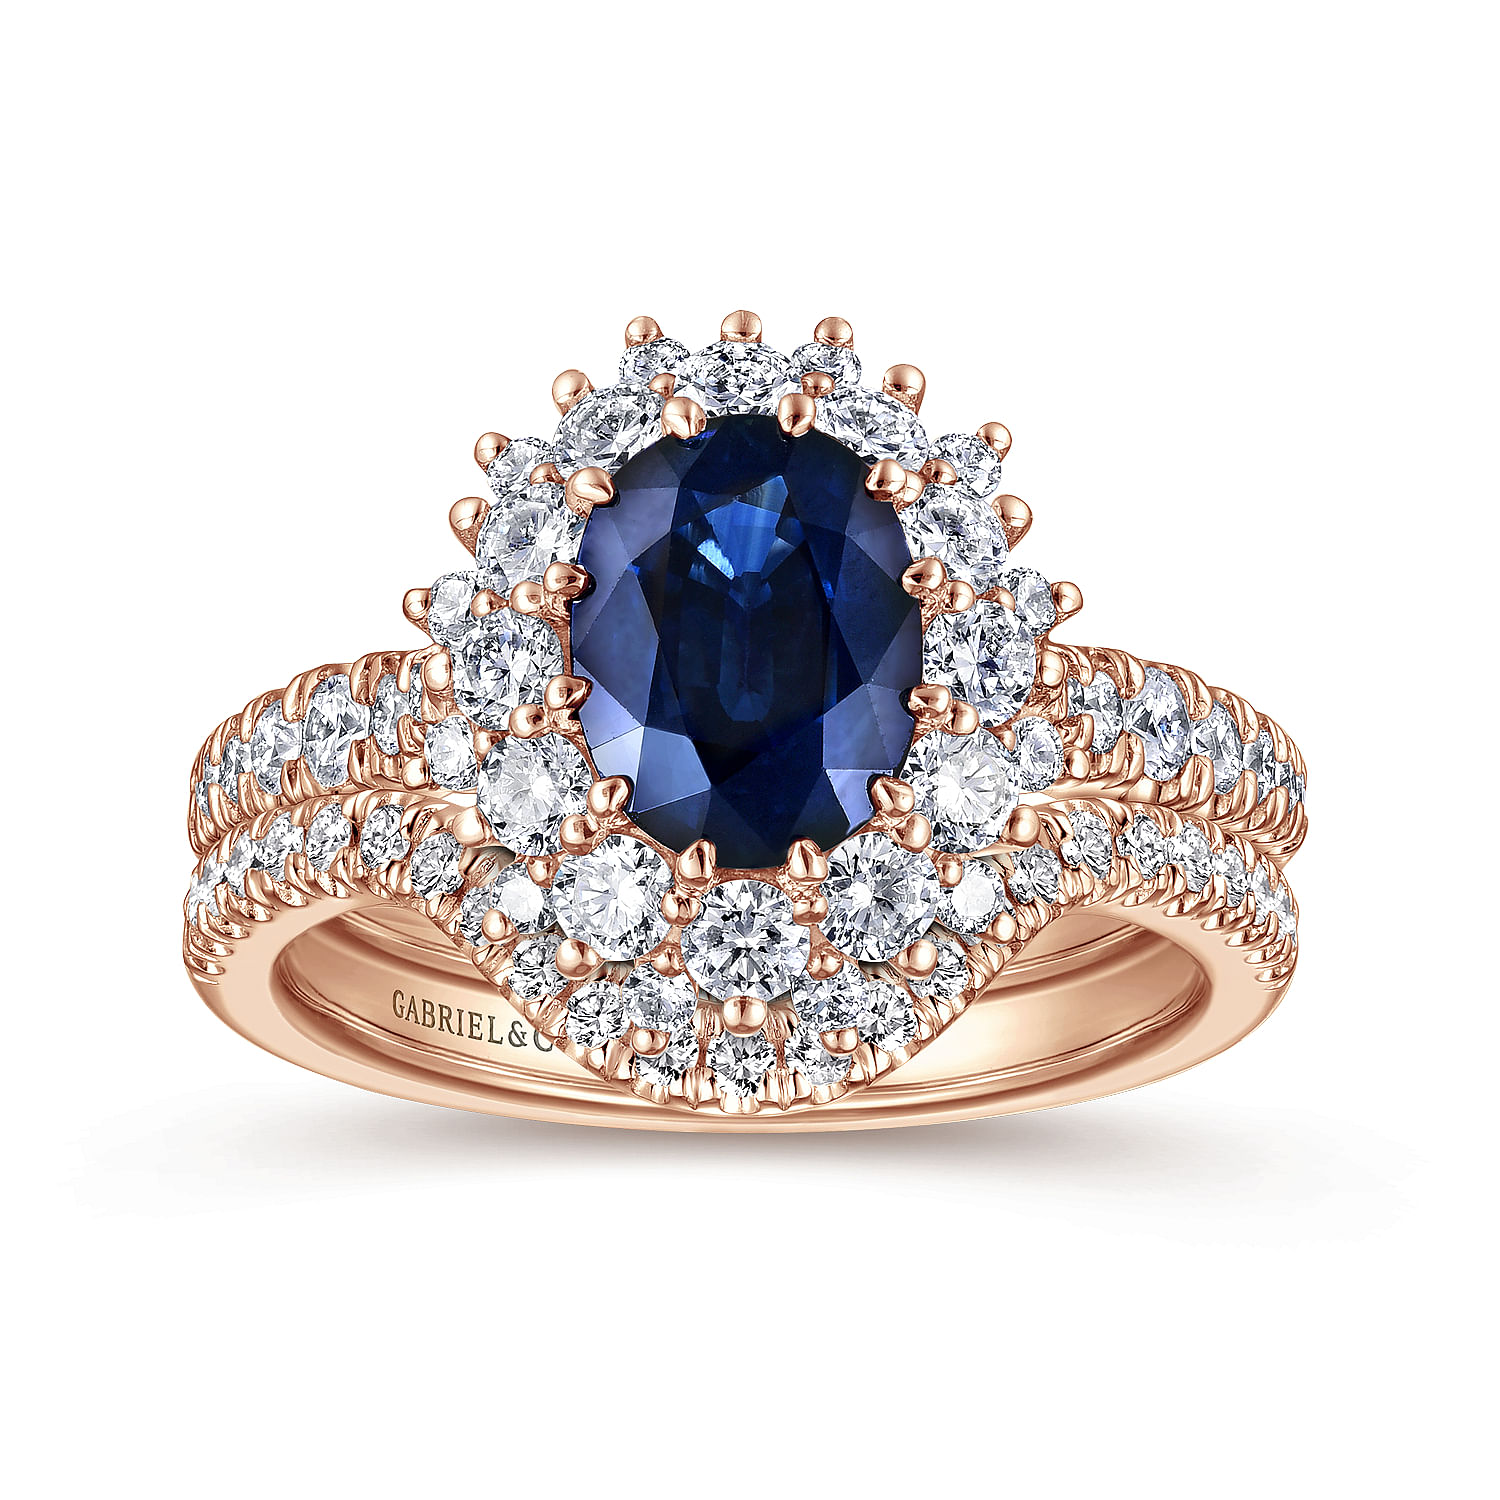 Imani - 14K Rose Gold Oval Halo Diamond and Sapphire Engagement Ring - 0.83 ct - Shot 3